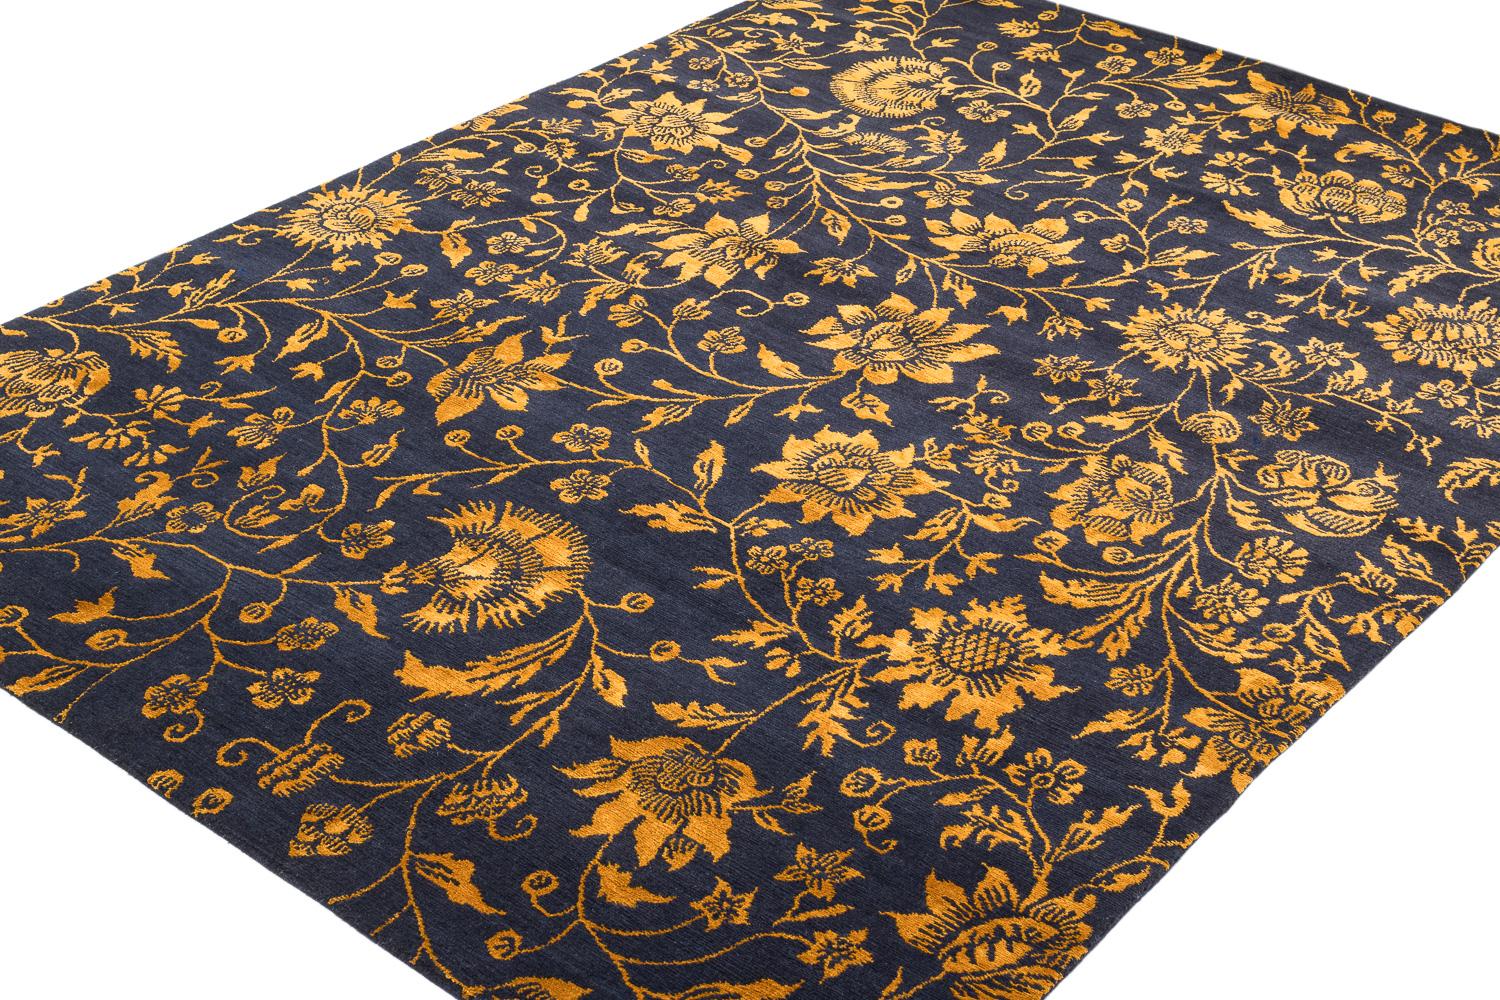 Hand-Woven Deep Navy Blue and Gold Traditional Floral Rug